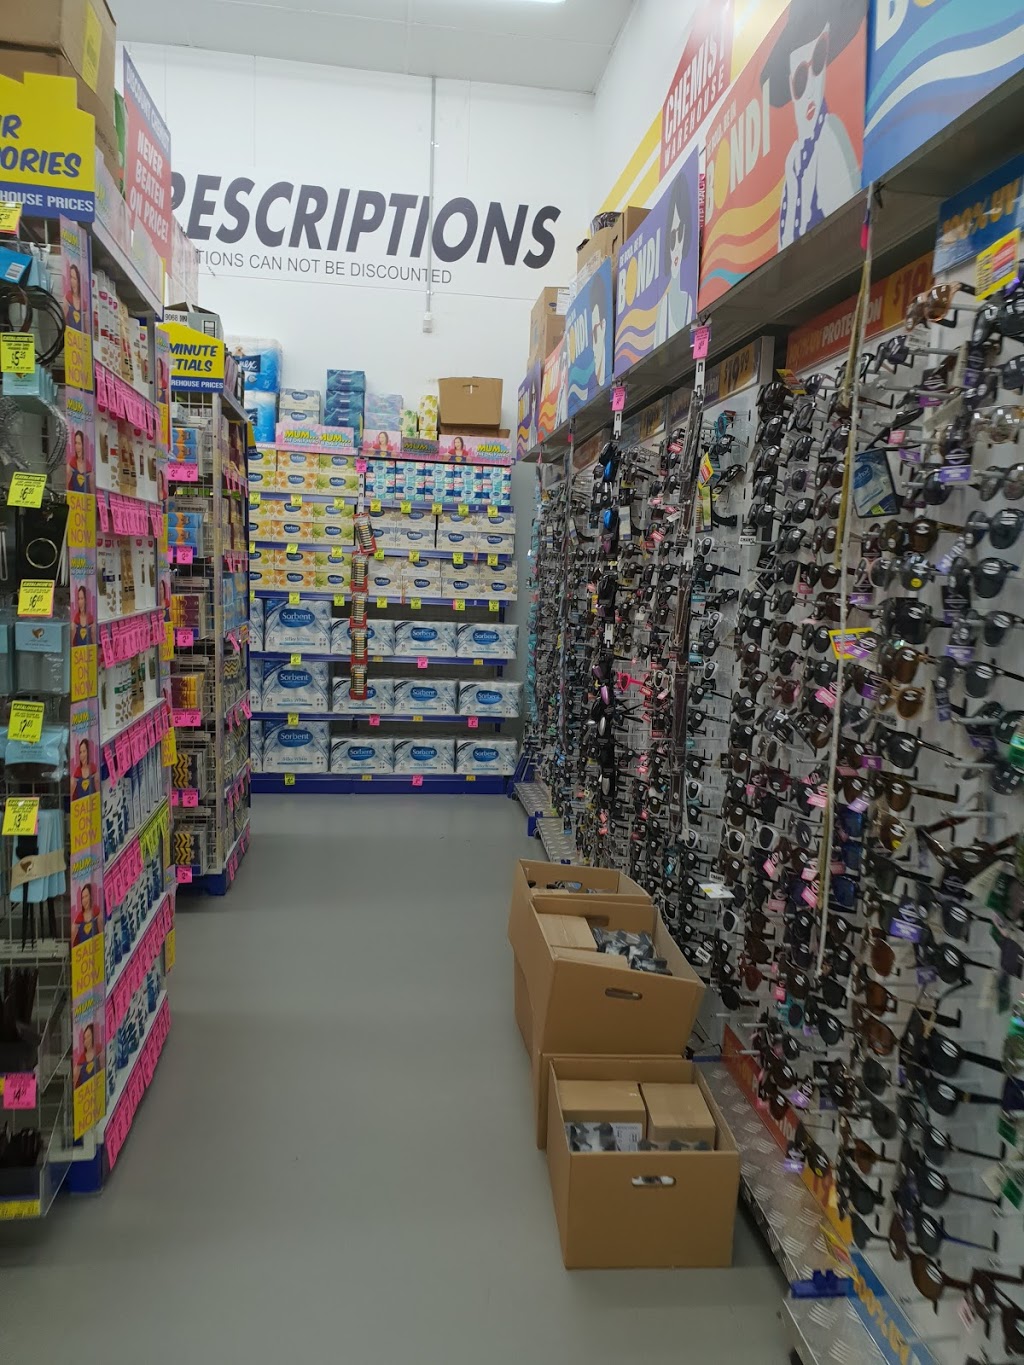 Chemist Warehouse | pharmacy | shop 1/34 Coonan St, Indooroopilly QLD 4068, Australia | 0737200511 OR +61 7 3720 0511